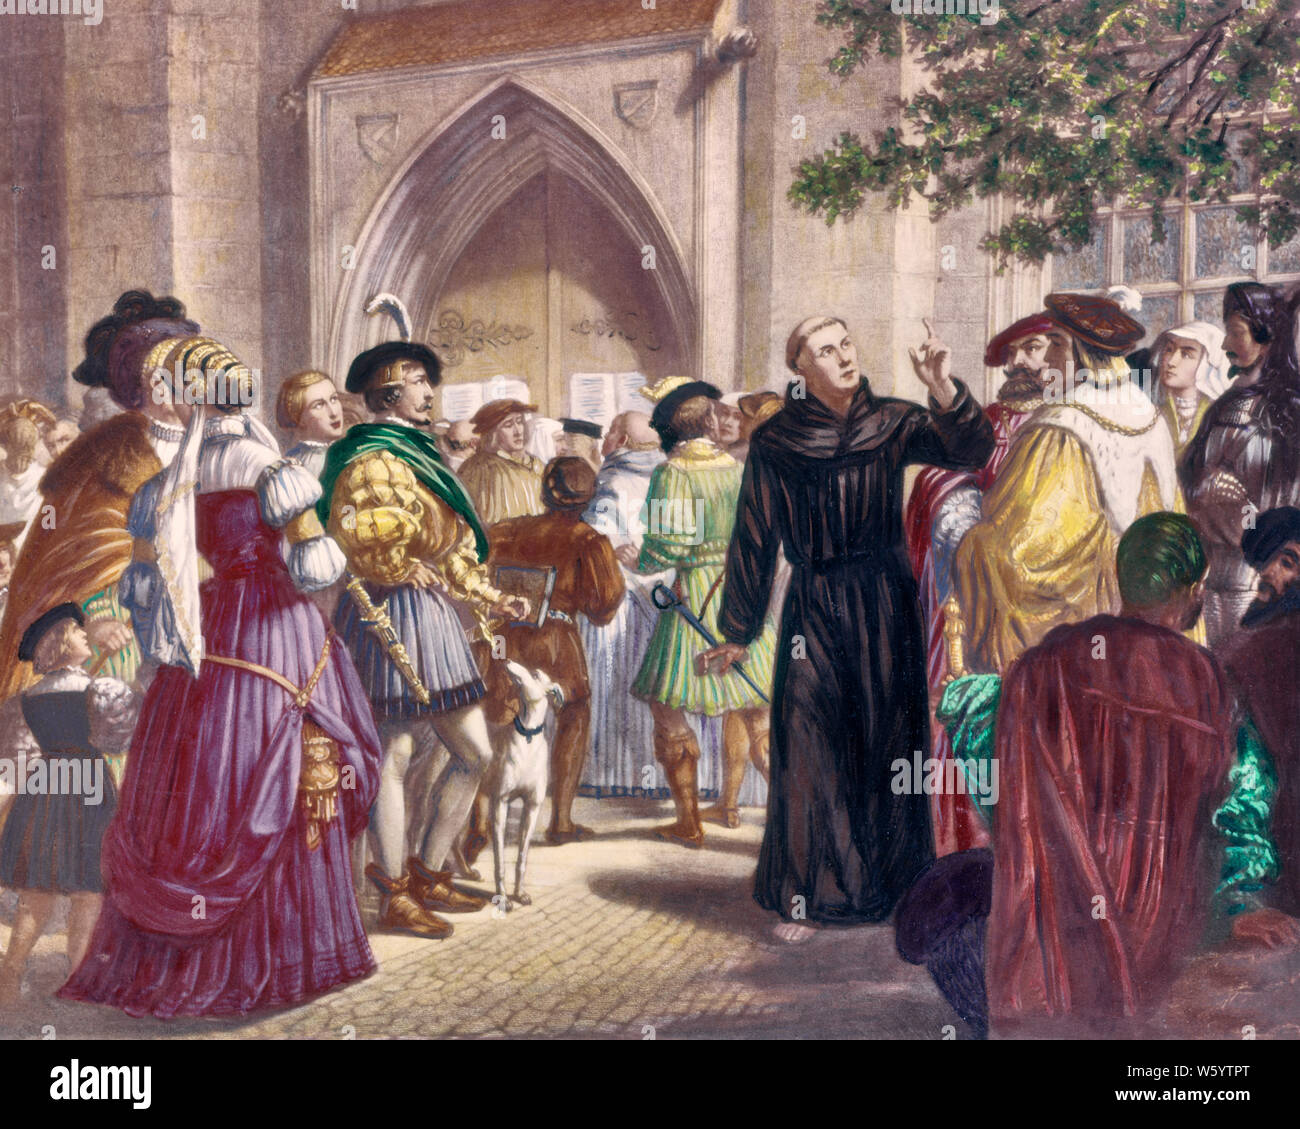 1500s 1517 MARTIN LUTHER AFTER NAILING NINETY-FIVE THESES TO CHURCH DOOR IN WITTENBURG GERMANY  - kr8300 SPL001 HARS REFORMER LUTHER MARTIN MARTIN LUTHER MONK CONCEPTUAL LUTHERAN NAILED 1500s EXCOMMUNICATED OLD FASHIONED PROTESTANT REFORMATION THEOLOGIAN VERNACULAR Stock Photo